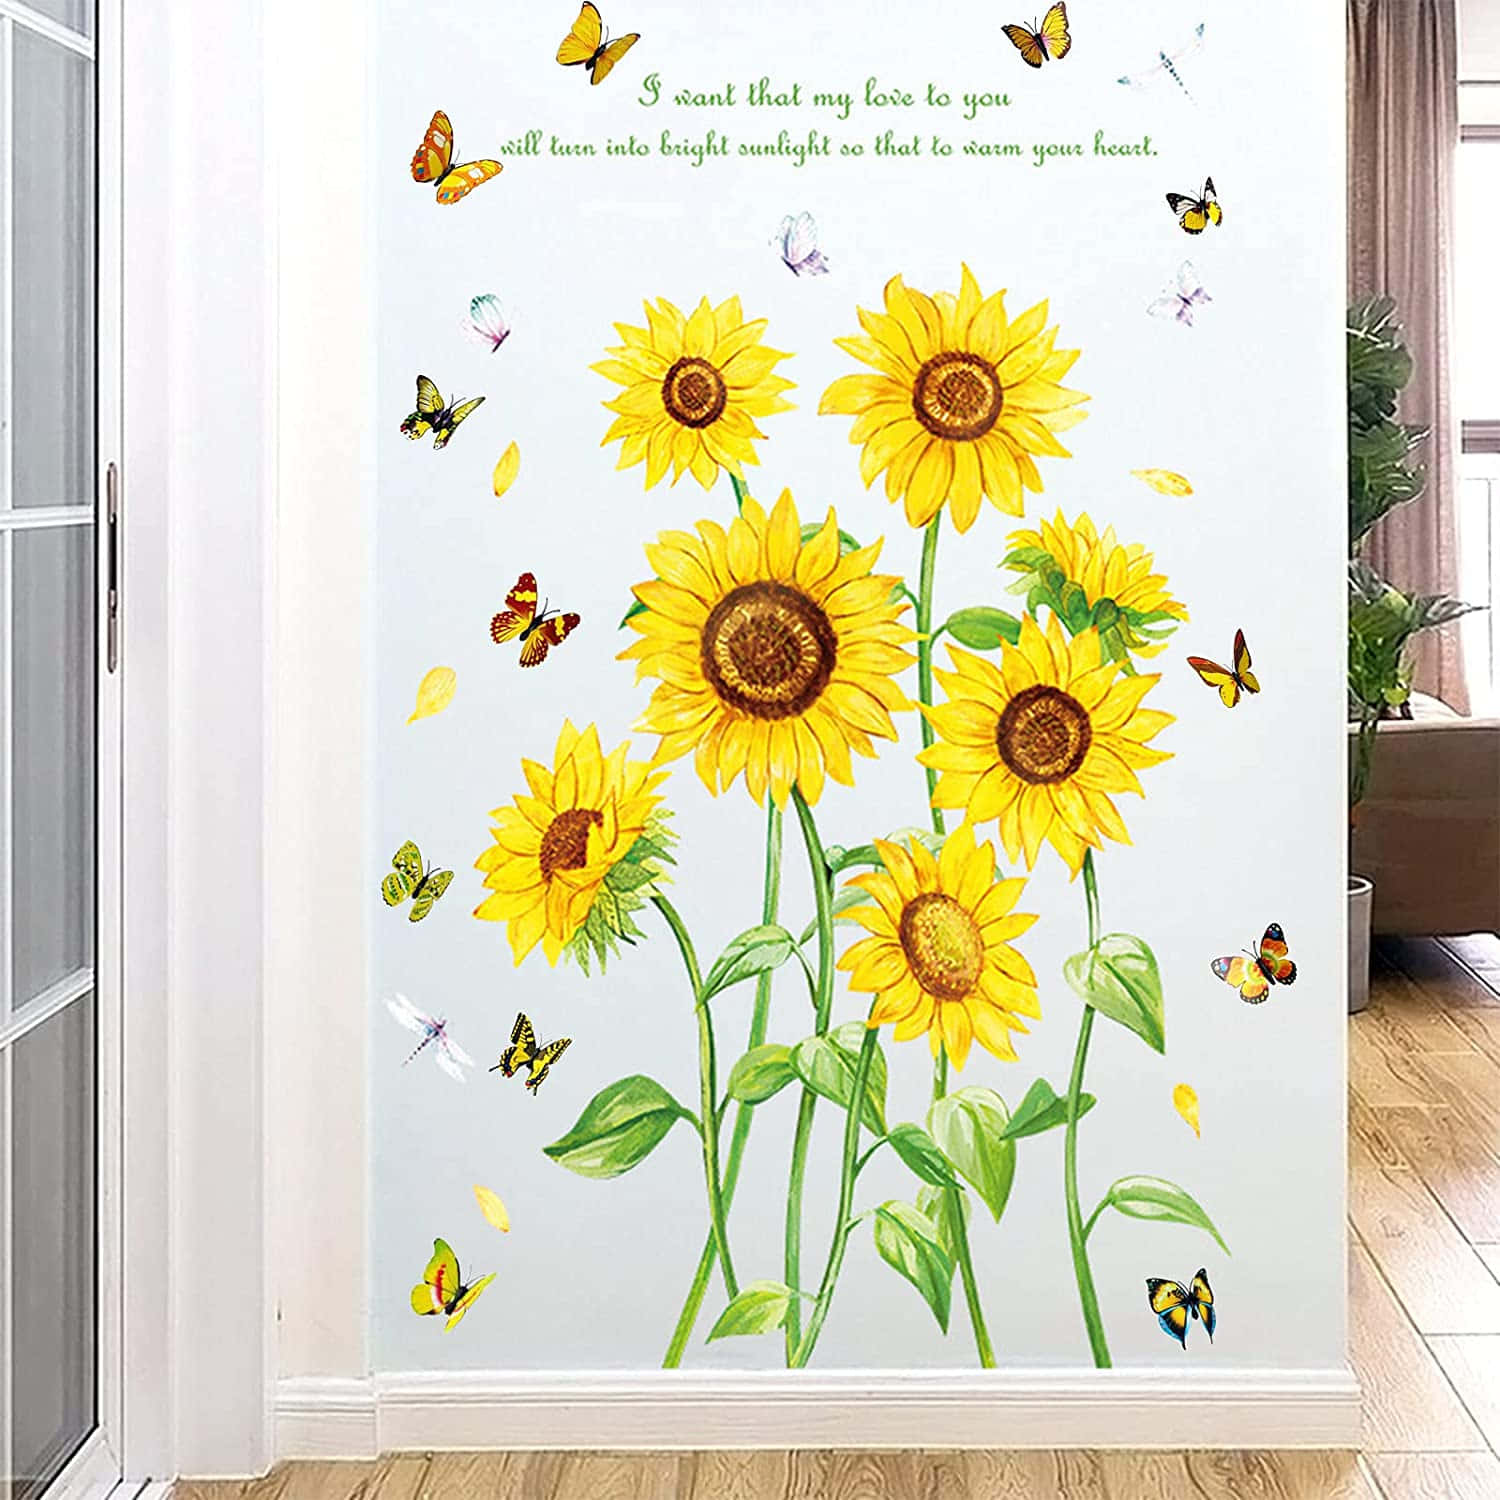 A Room With Sunflowers And Butterflies On The Wall